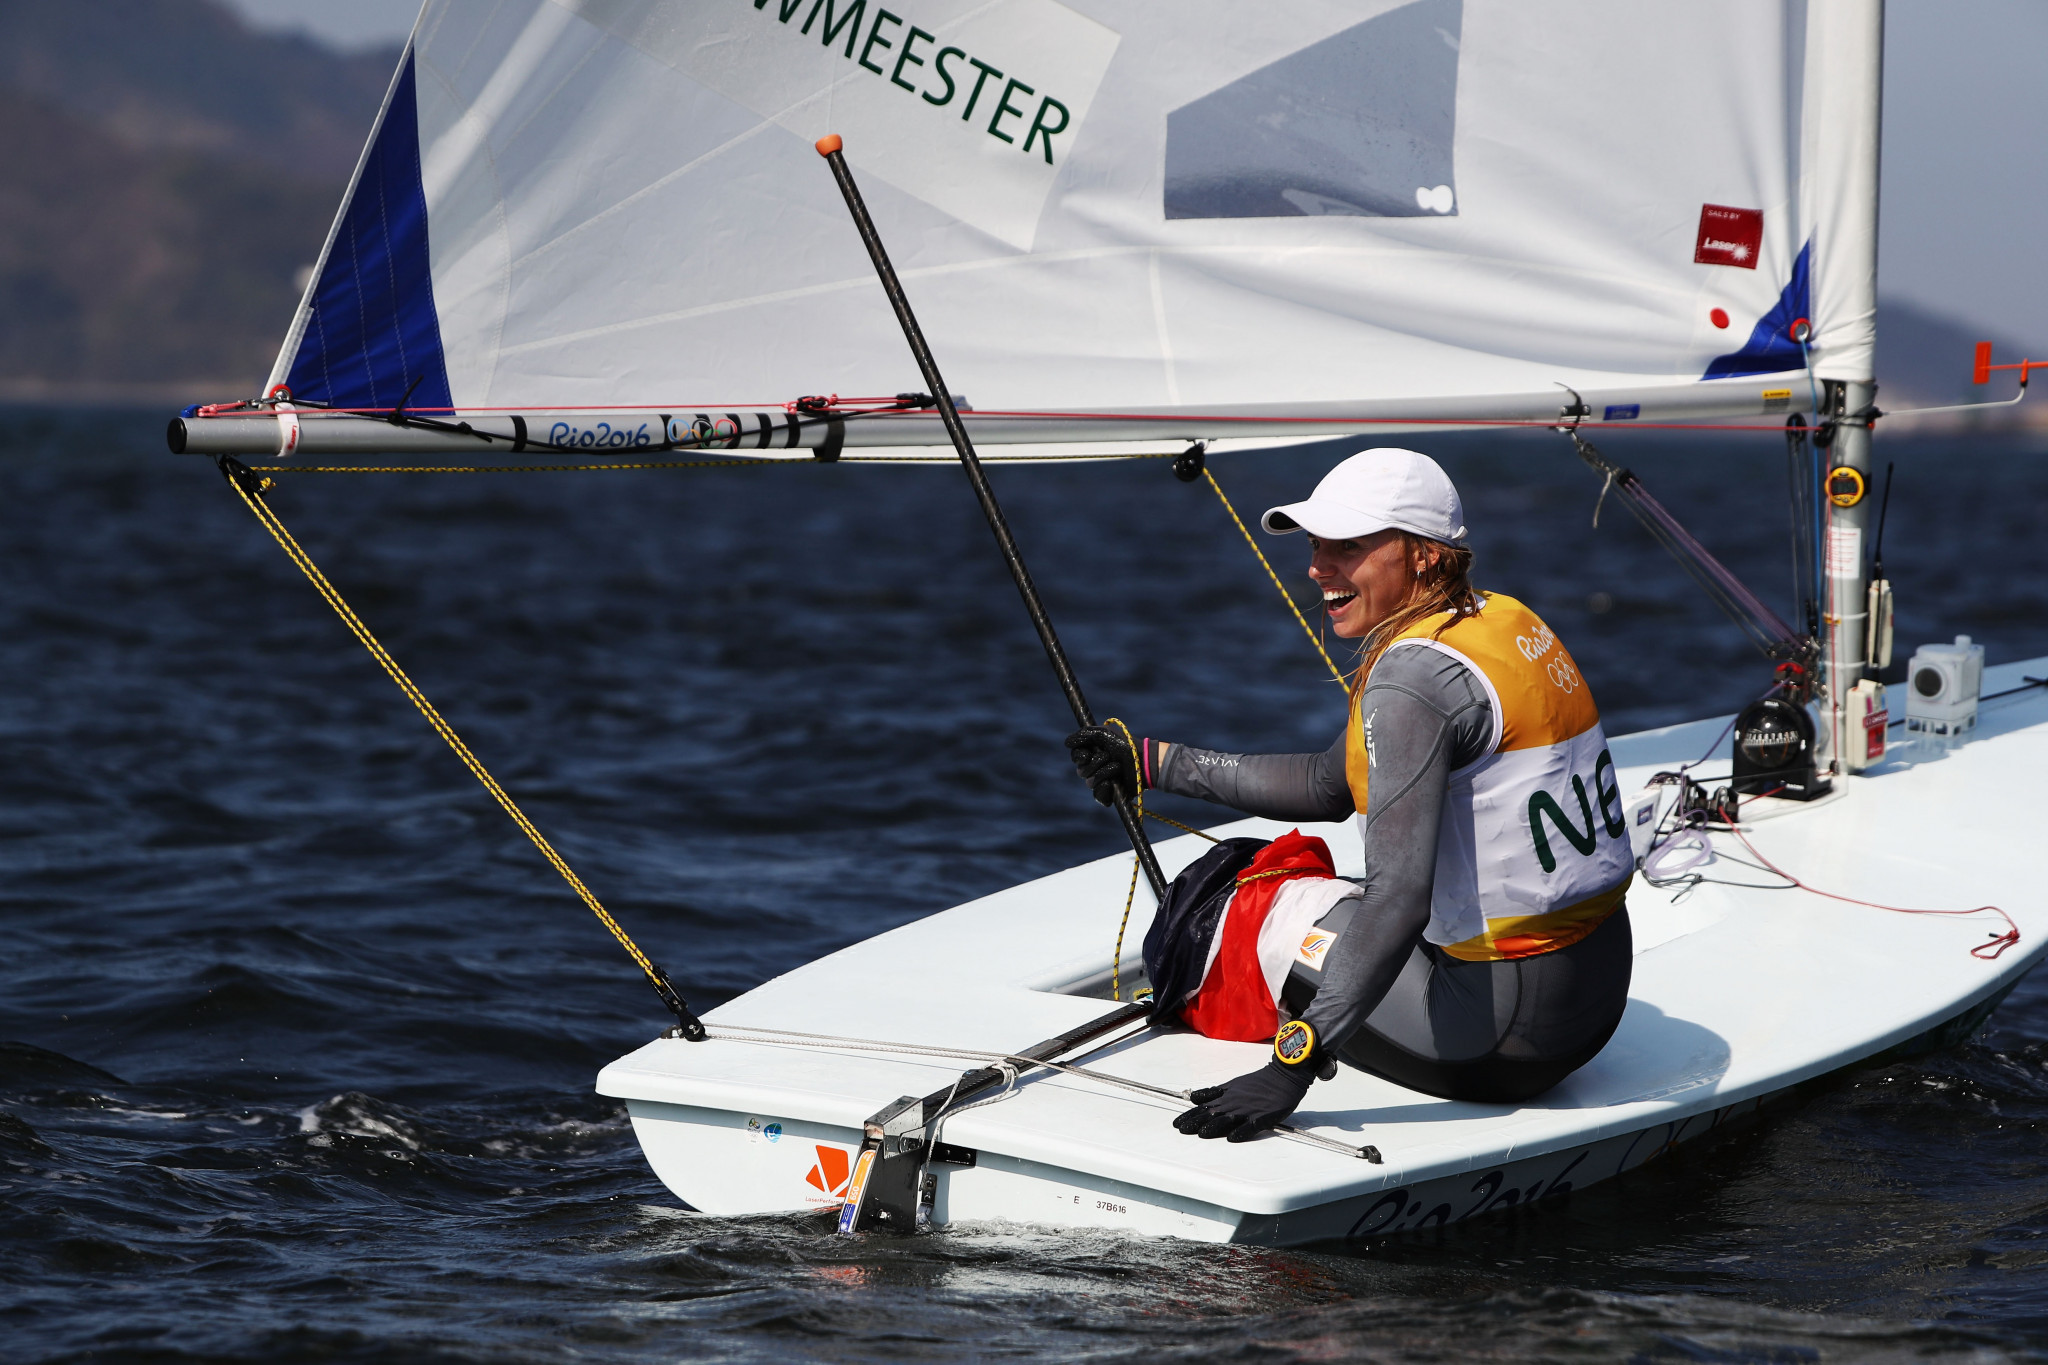 Weather comes to rescue as Bouwmeester secures gold at Laser Radial Women's World Championship